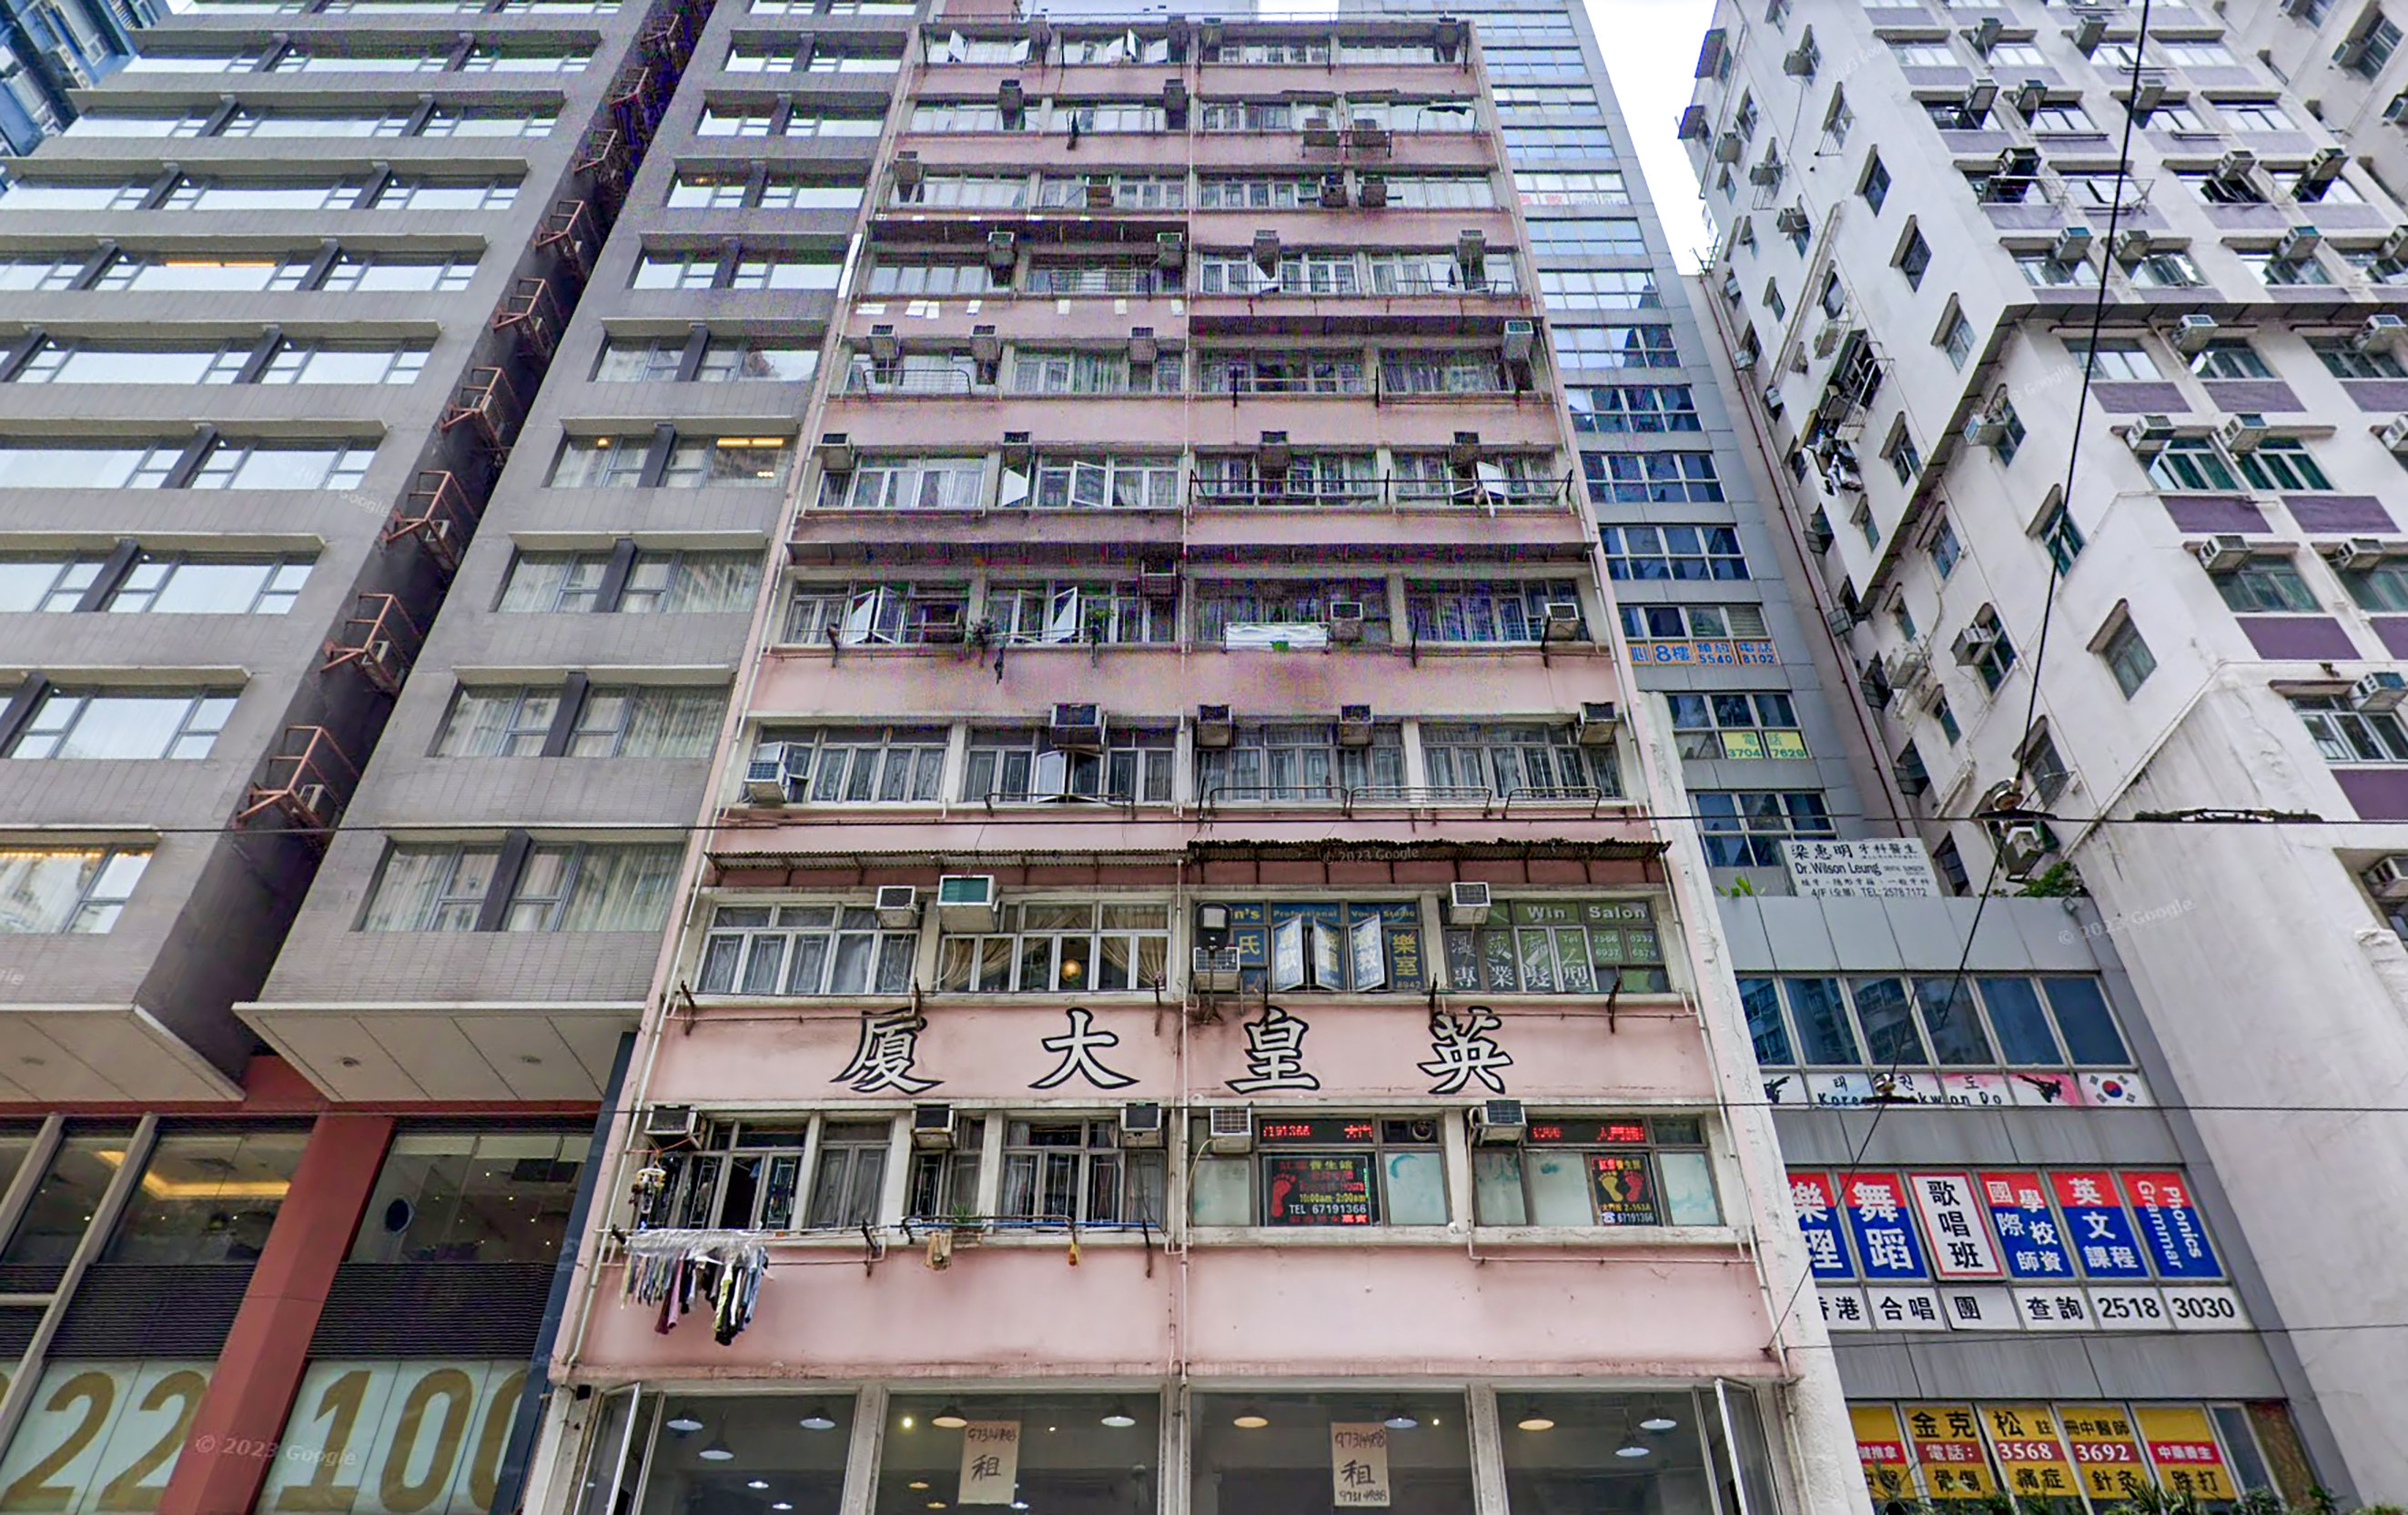 Ying Wong House in Hong Kong’s North Point, where four residents in separate subdivided flats were injured by a fire. Photo: Handout